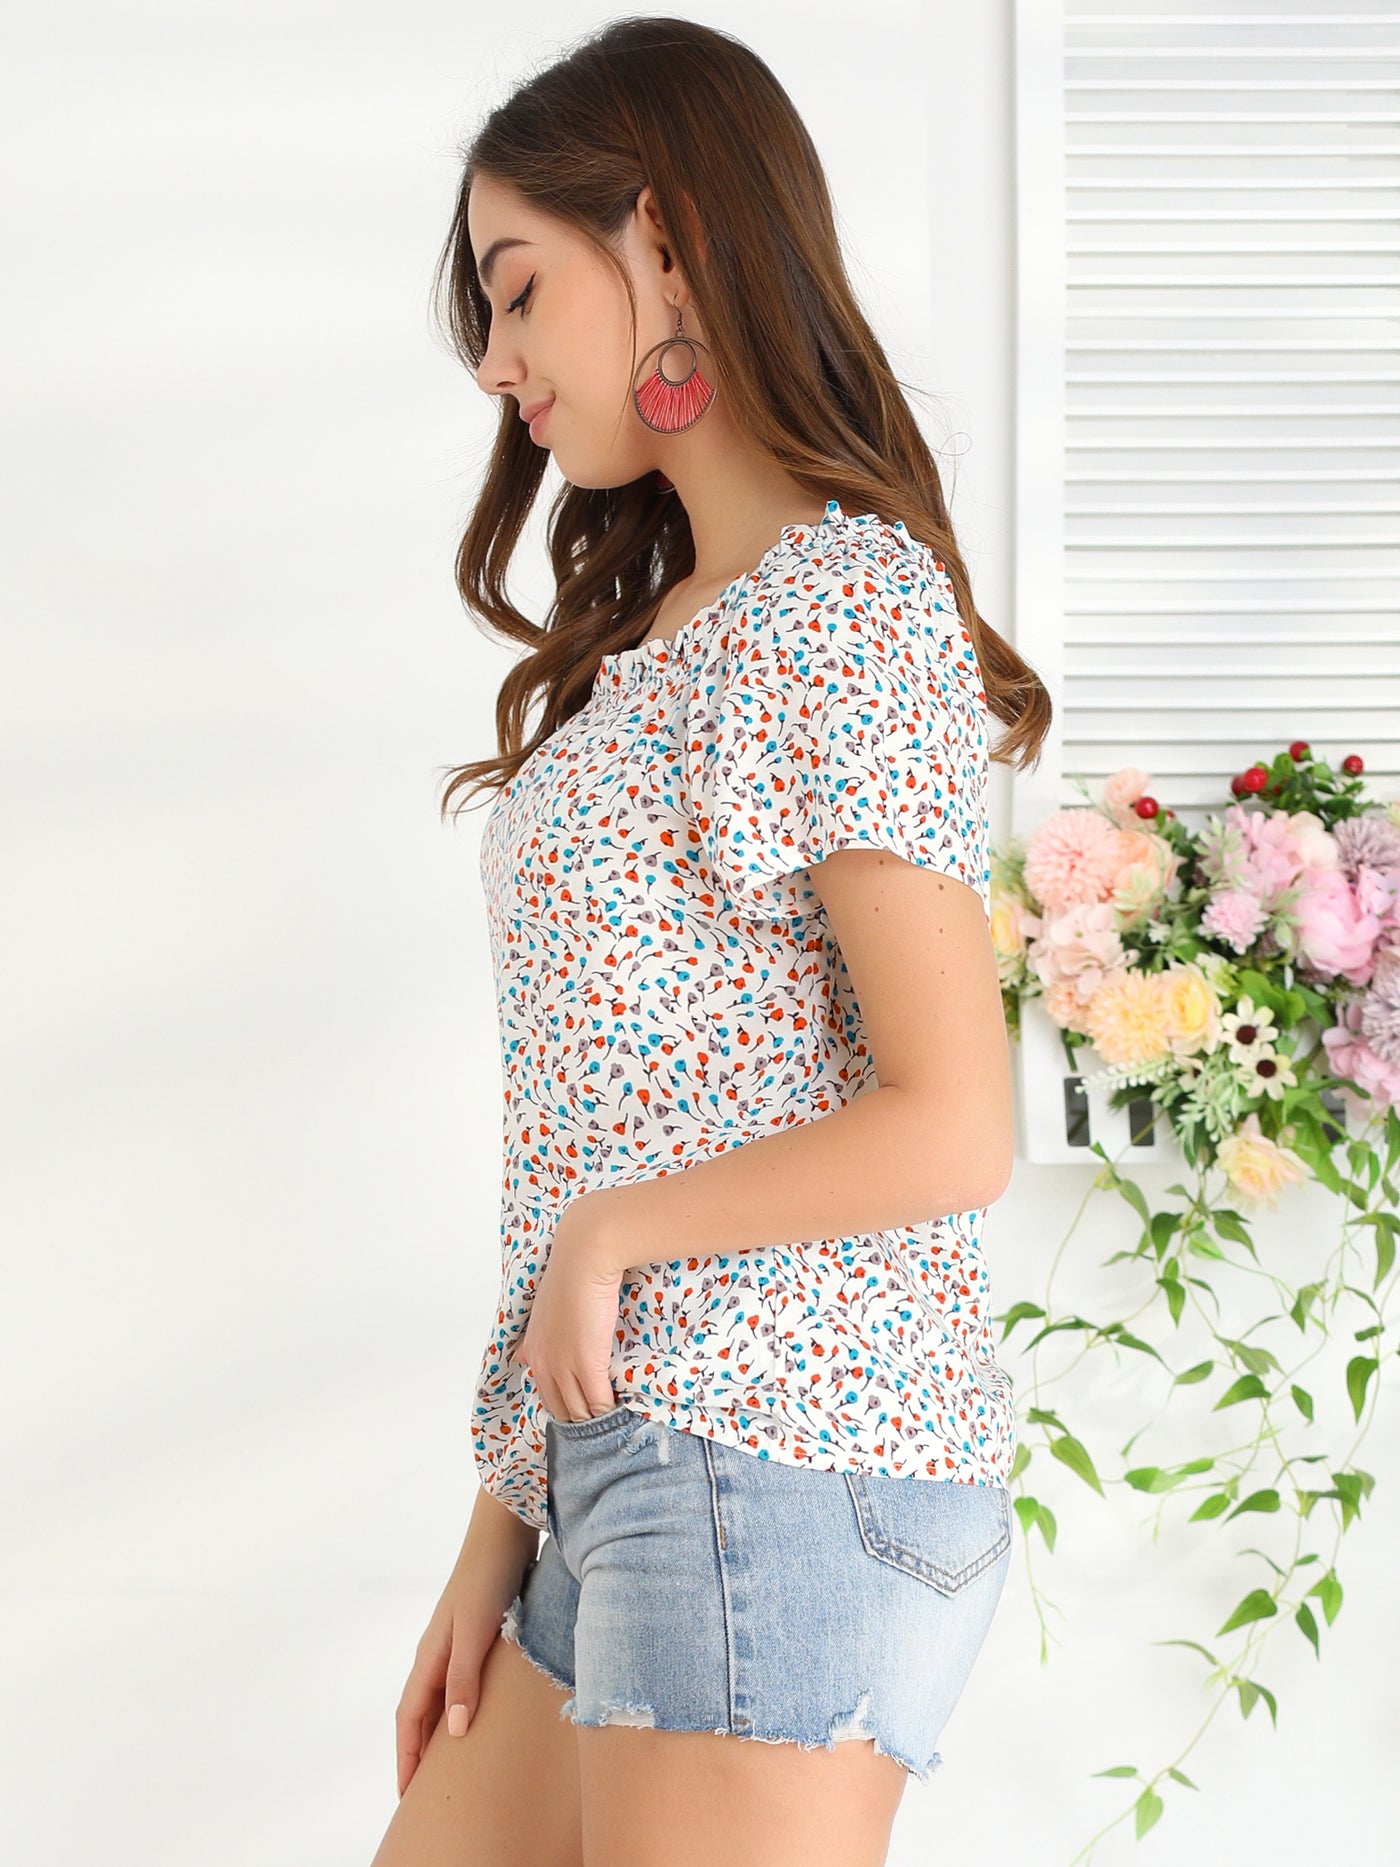 Allegra K Casual Square Ruffle Neck Blouse Short Sleeve Summer Floral Tops